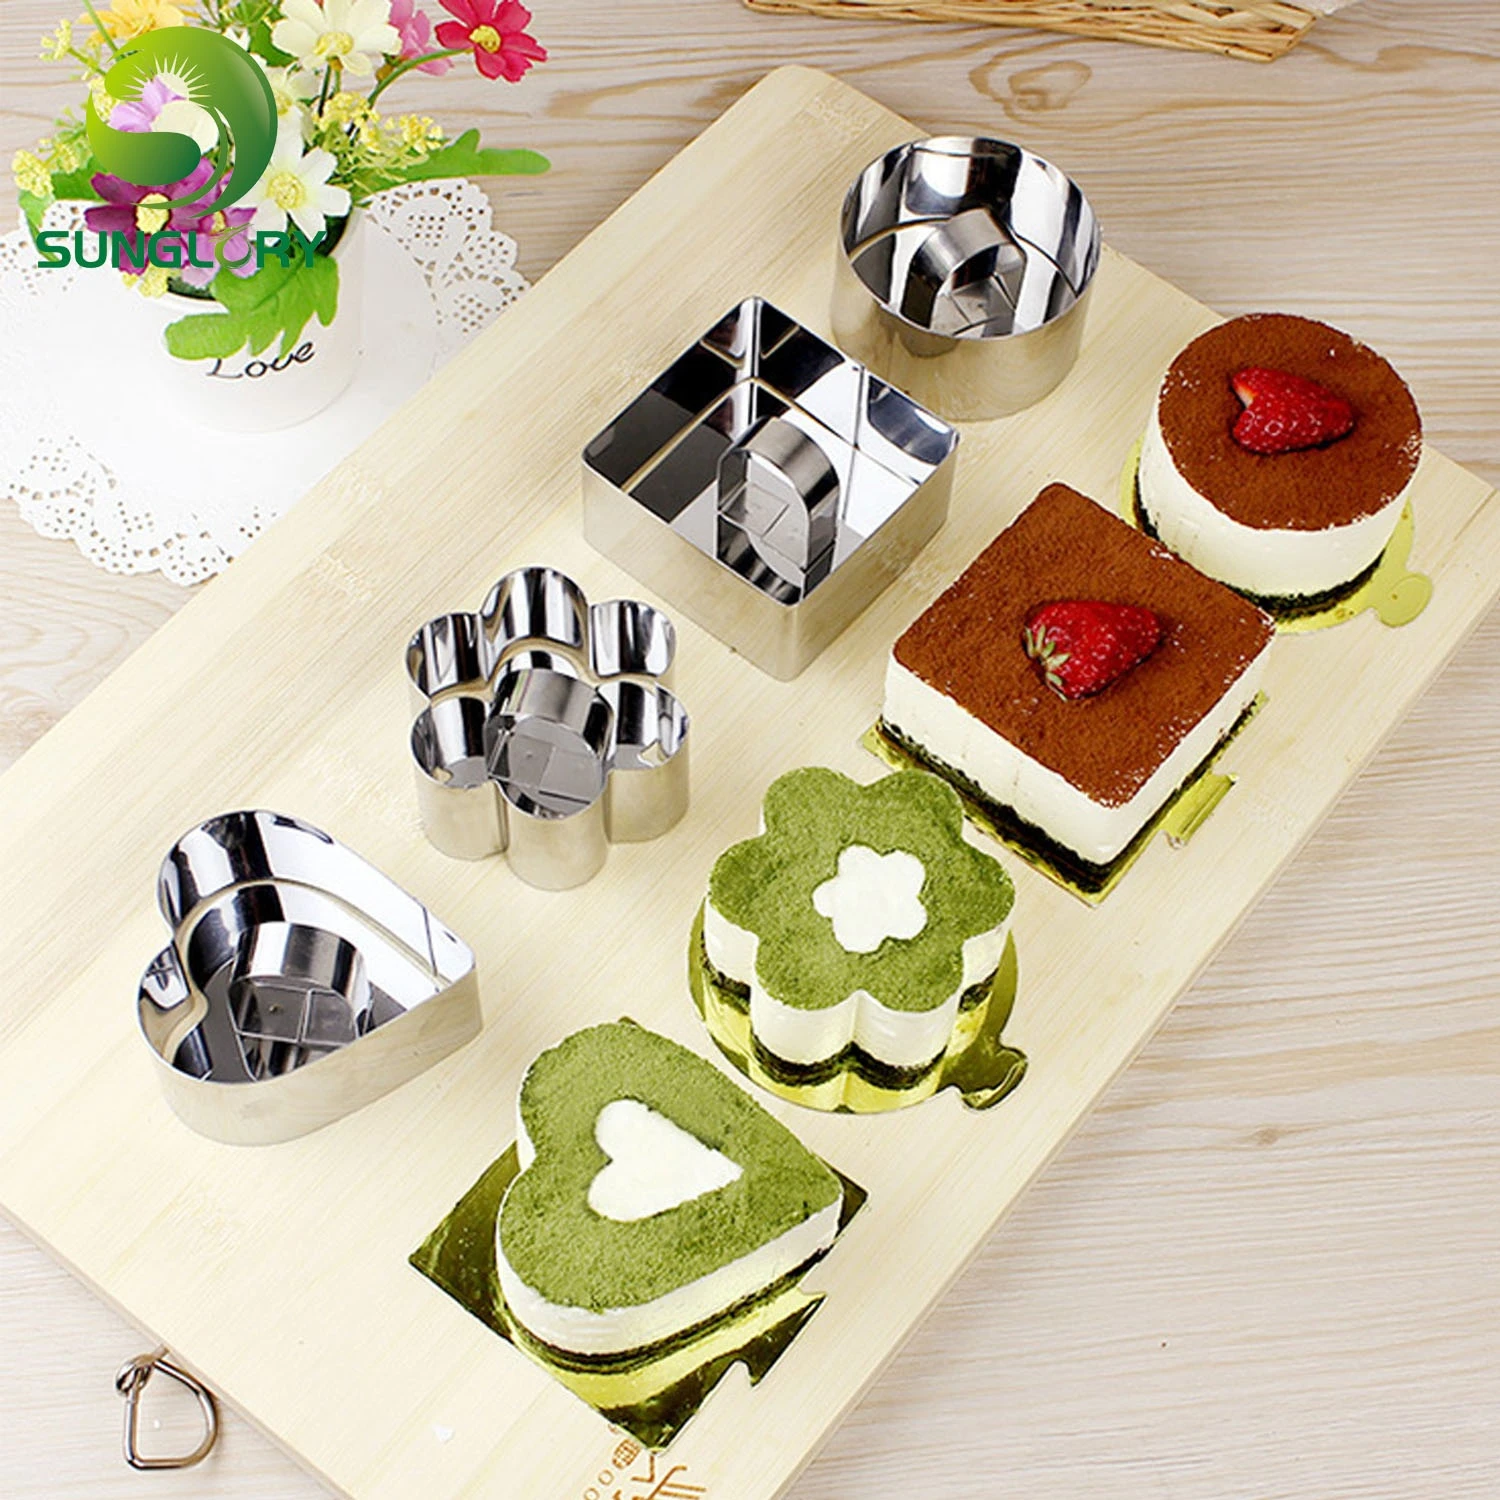 5PCS Round Heart Square Flower Triangular Cheese Cake Mold Baking Stainless Steel Mousse Ring Egg Tiramisu Mold Cookie Cutter